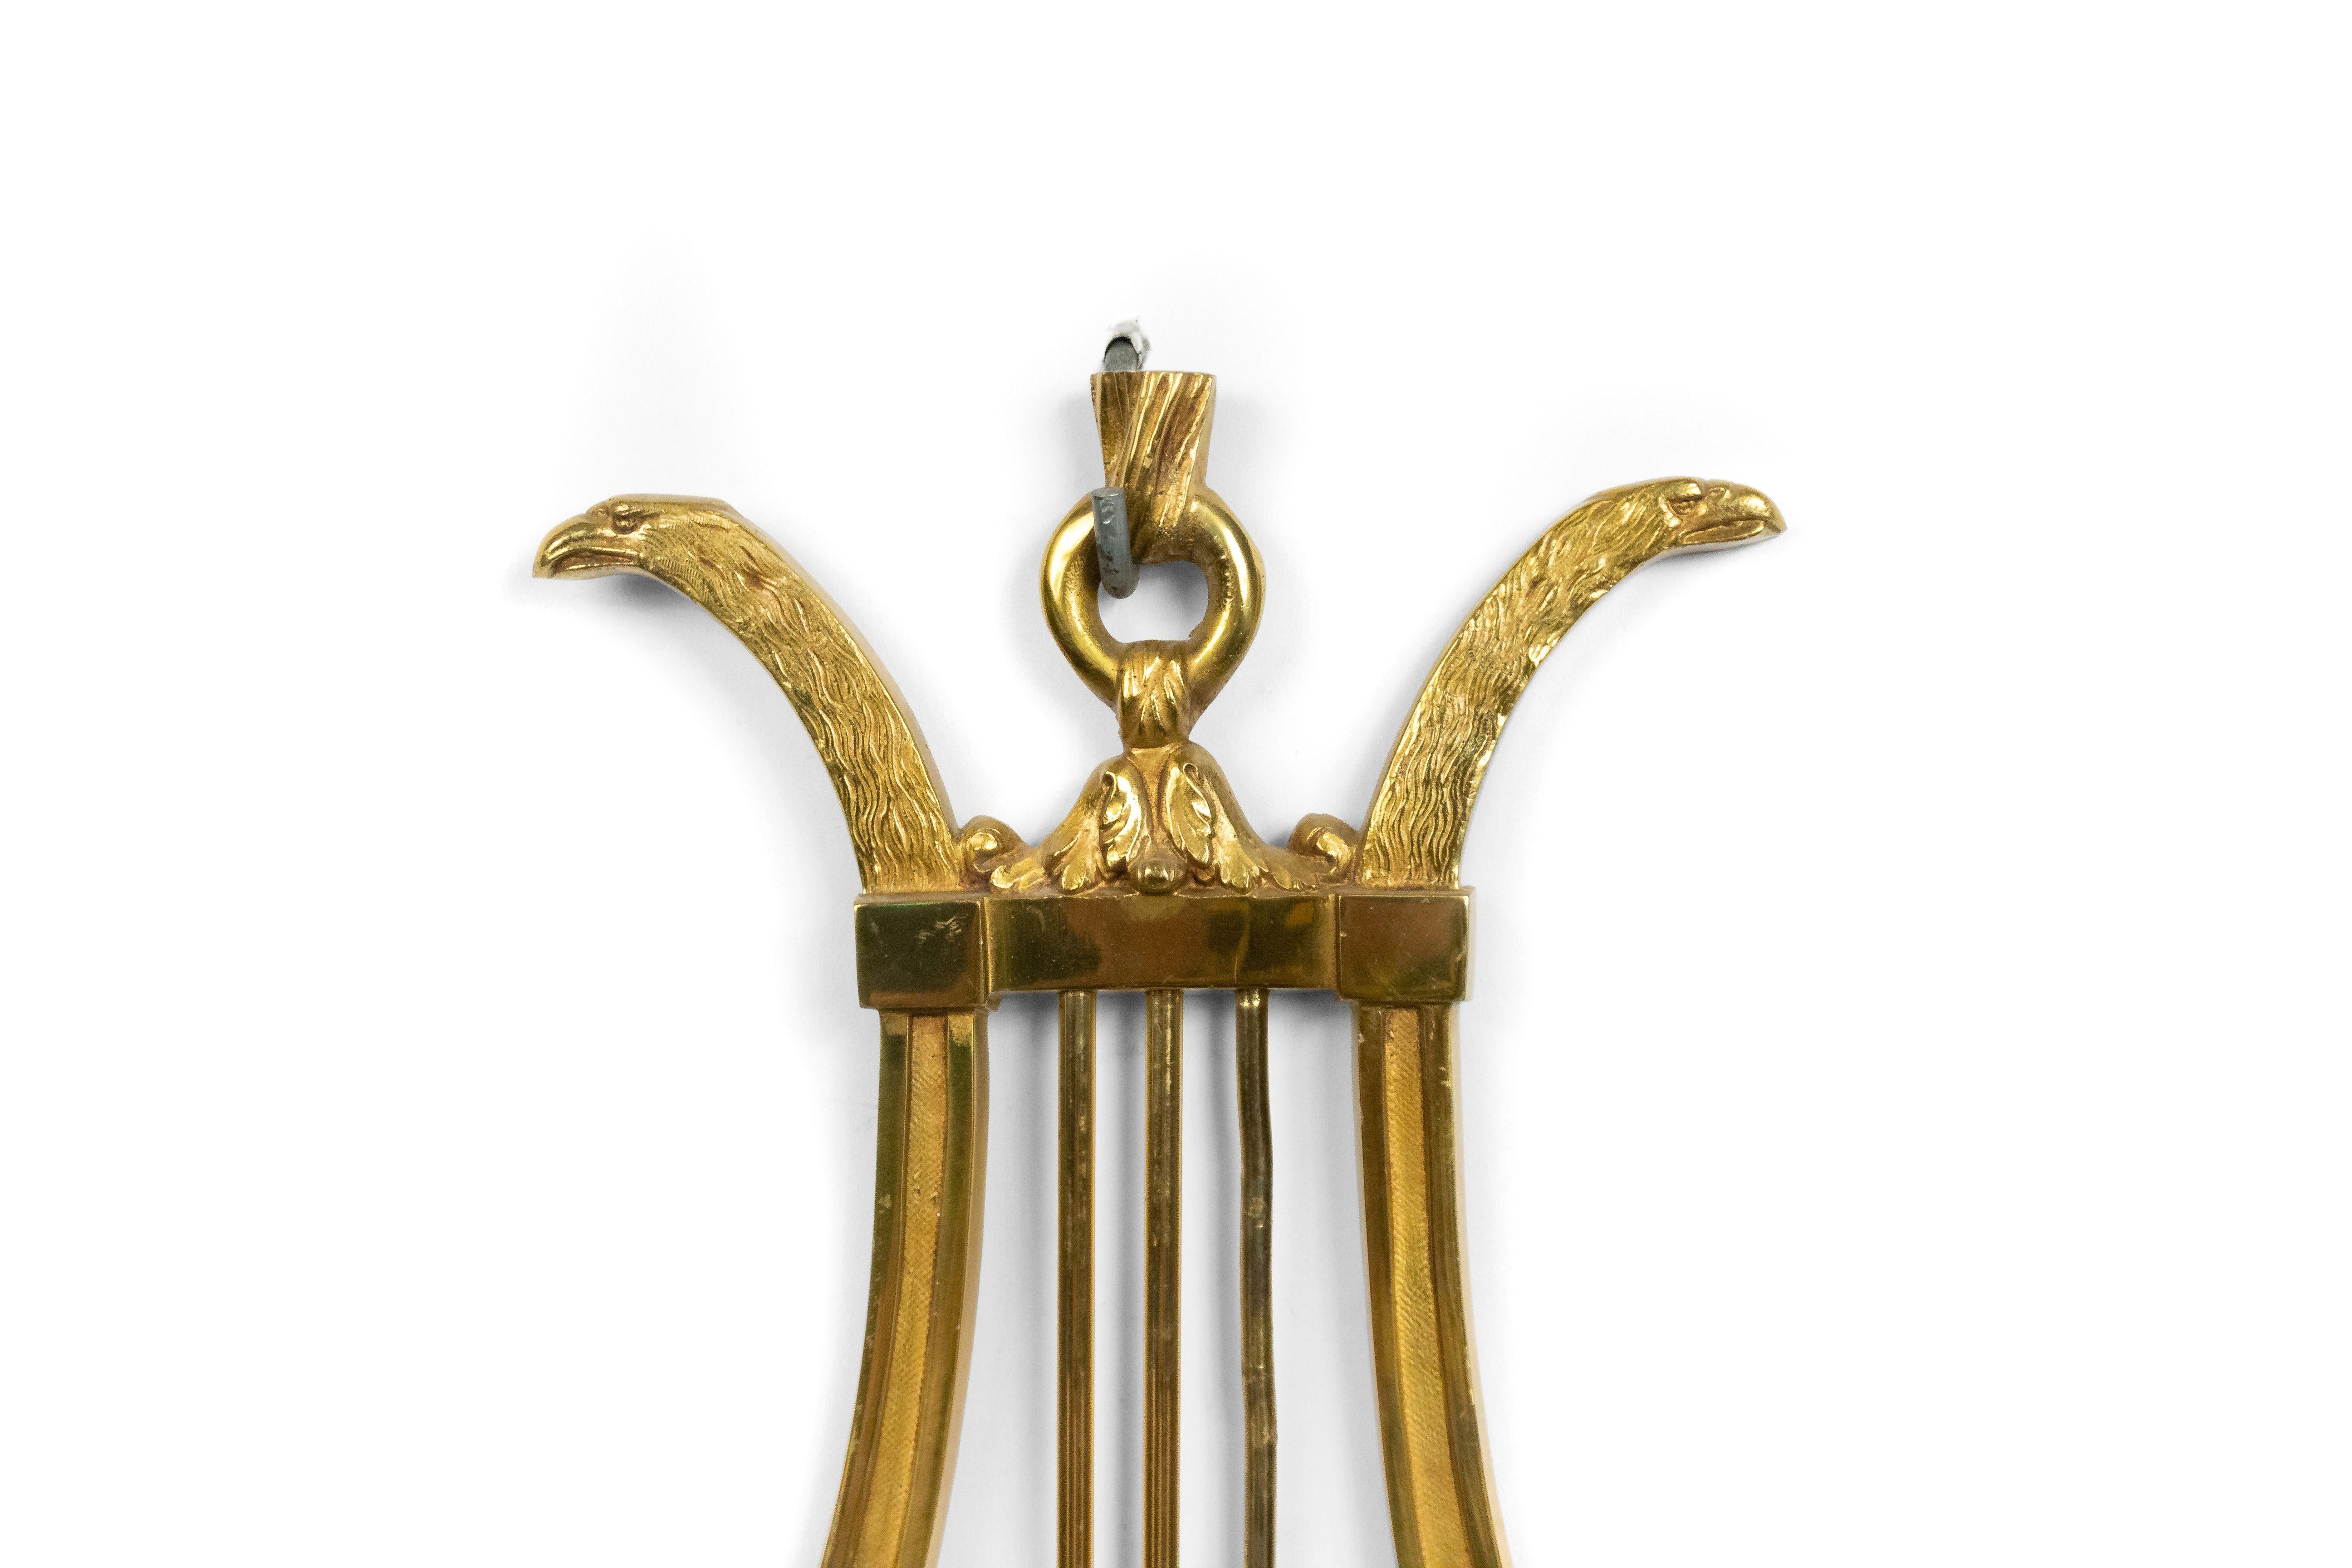 Pair of French Directoire style brass lyre design 3-arm wall sconces with 2 eagle heads, 20th century.